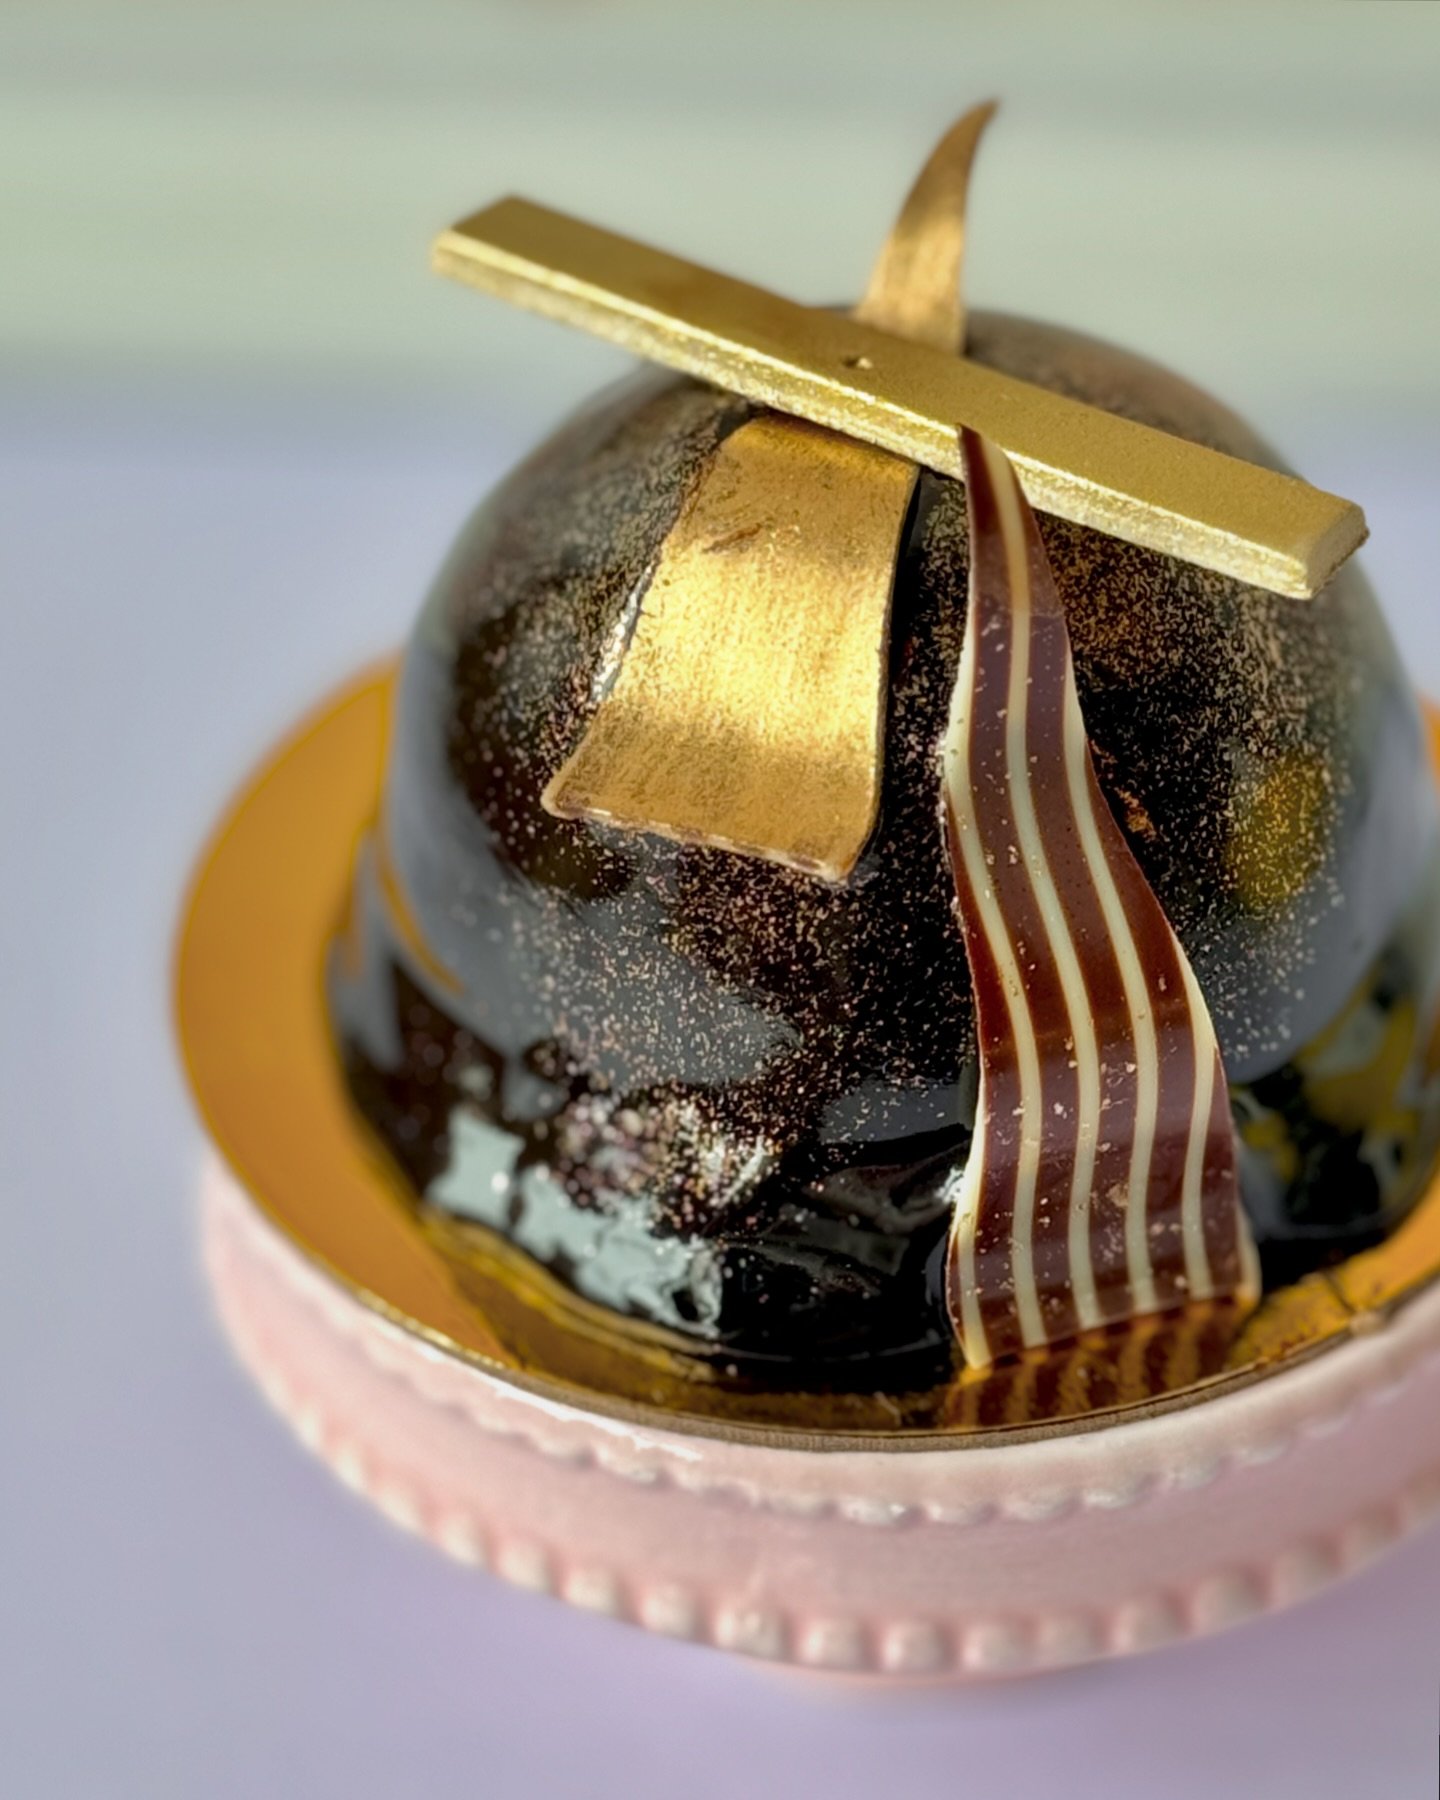 Give mom a chance to indulge this Mother&rsquo;s Day with one of our chocolate bombs🤤🍫

A chocolate flourless cake atop a rich chocolate crust, filled with salted caramel and caramel cup candies, covered in a decadent mirror glaze and finished with